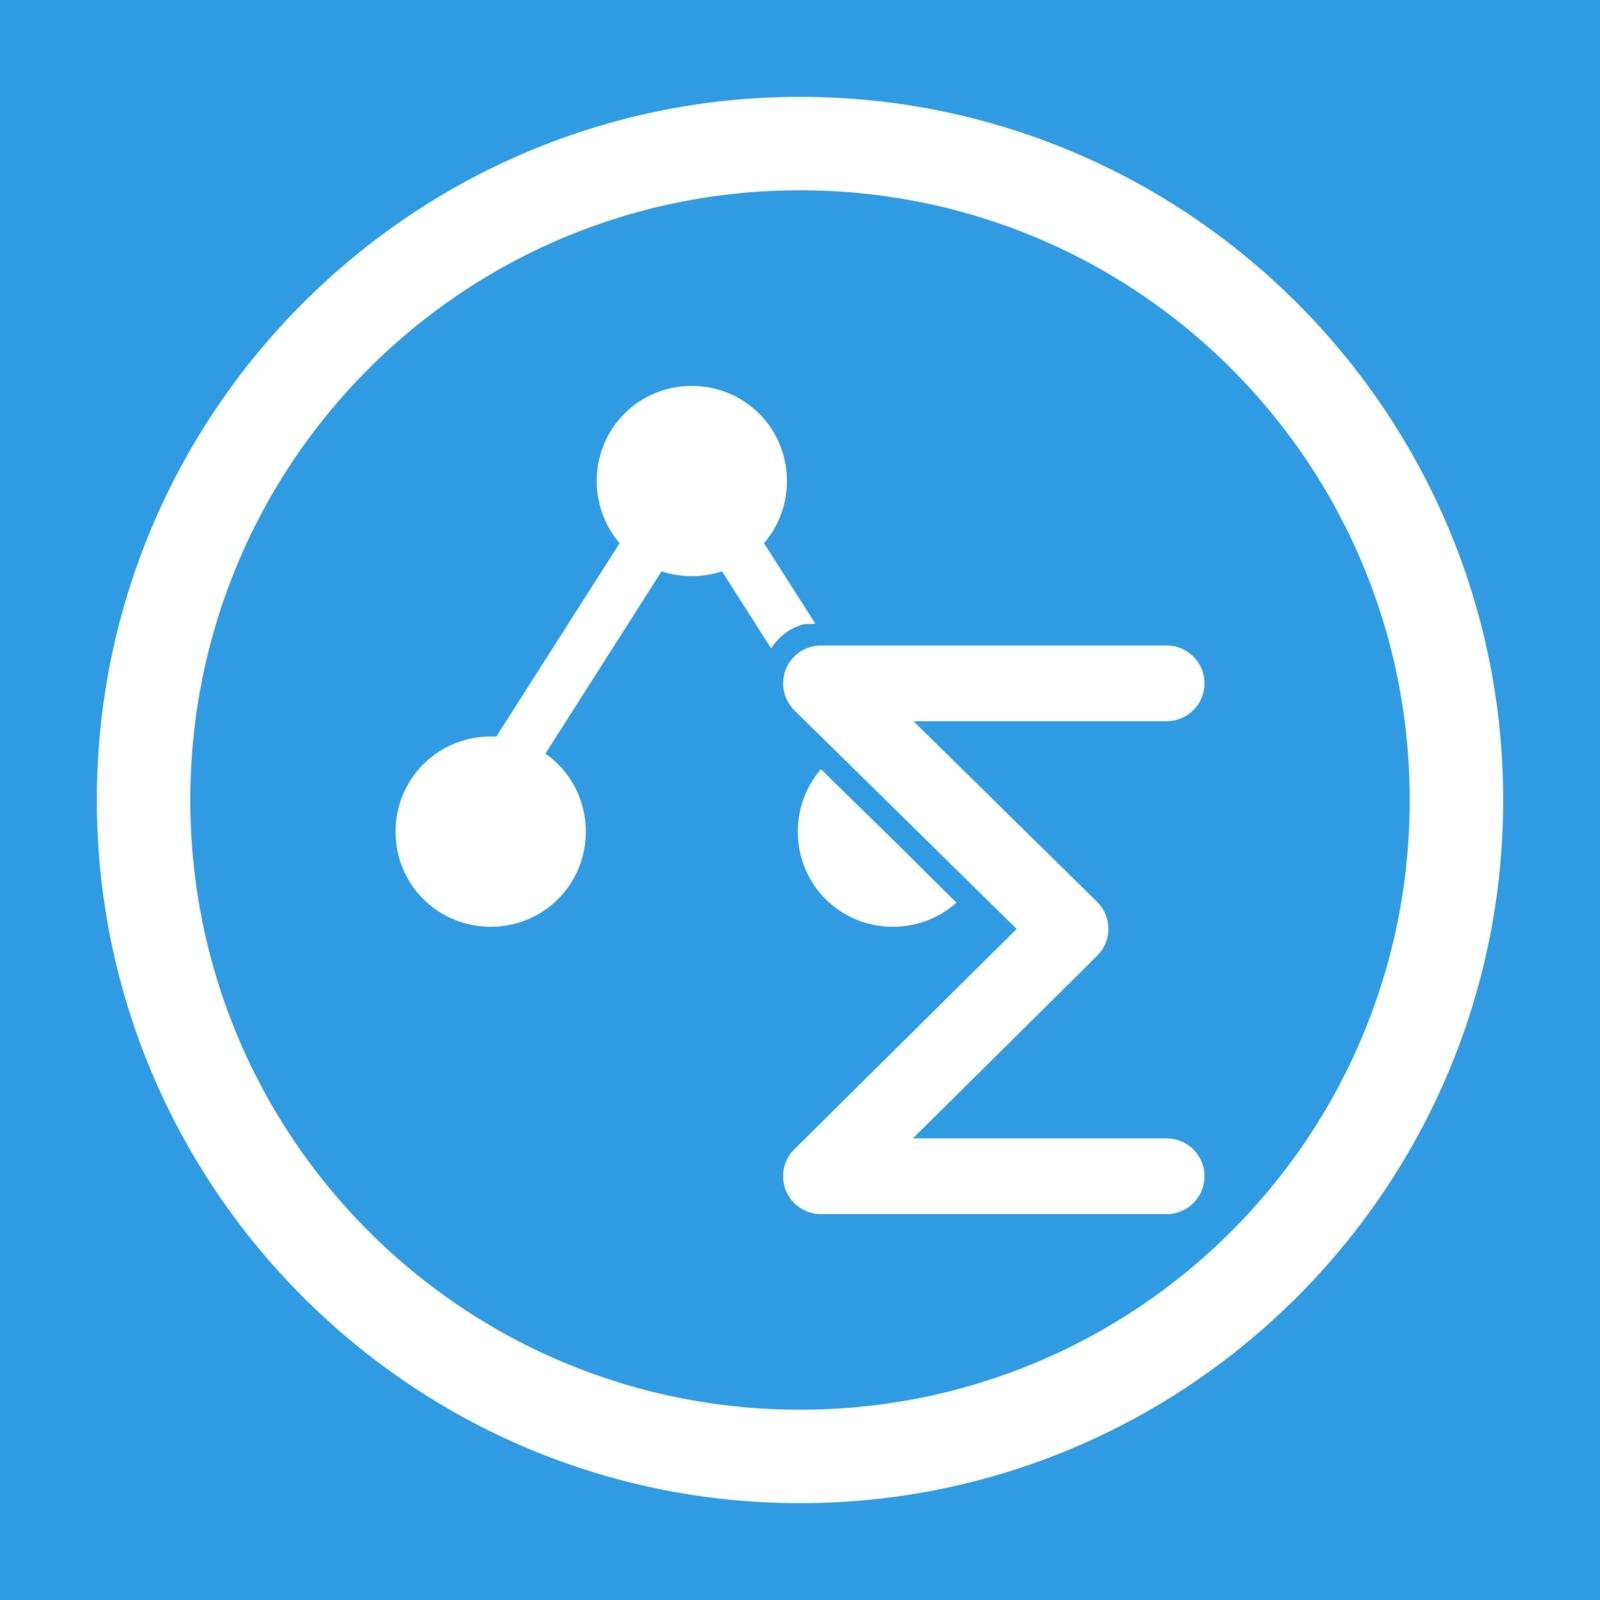 Analysis vector icon. This flat rounded symbol uses white color and isolated on a blue background.